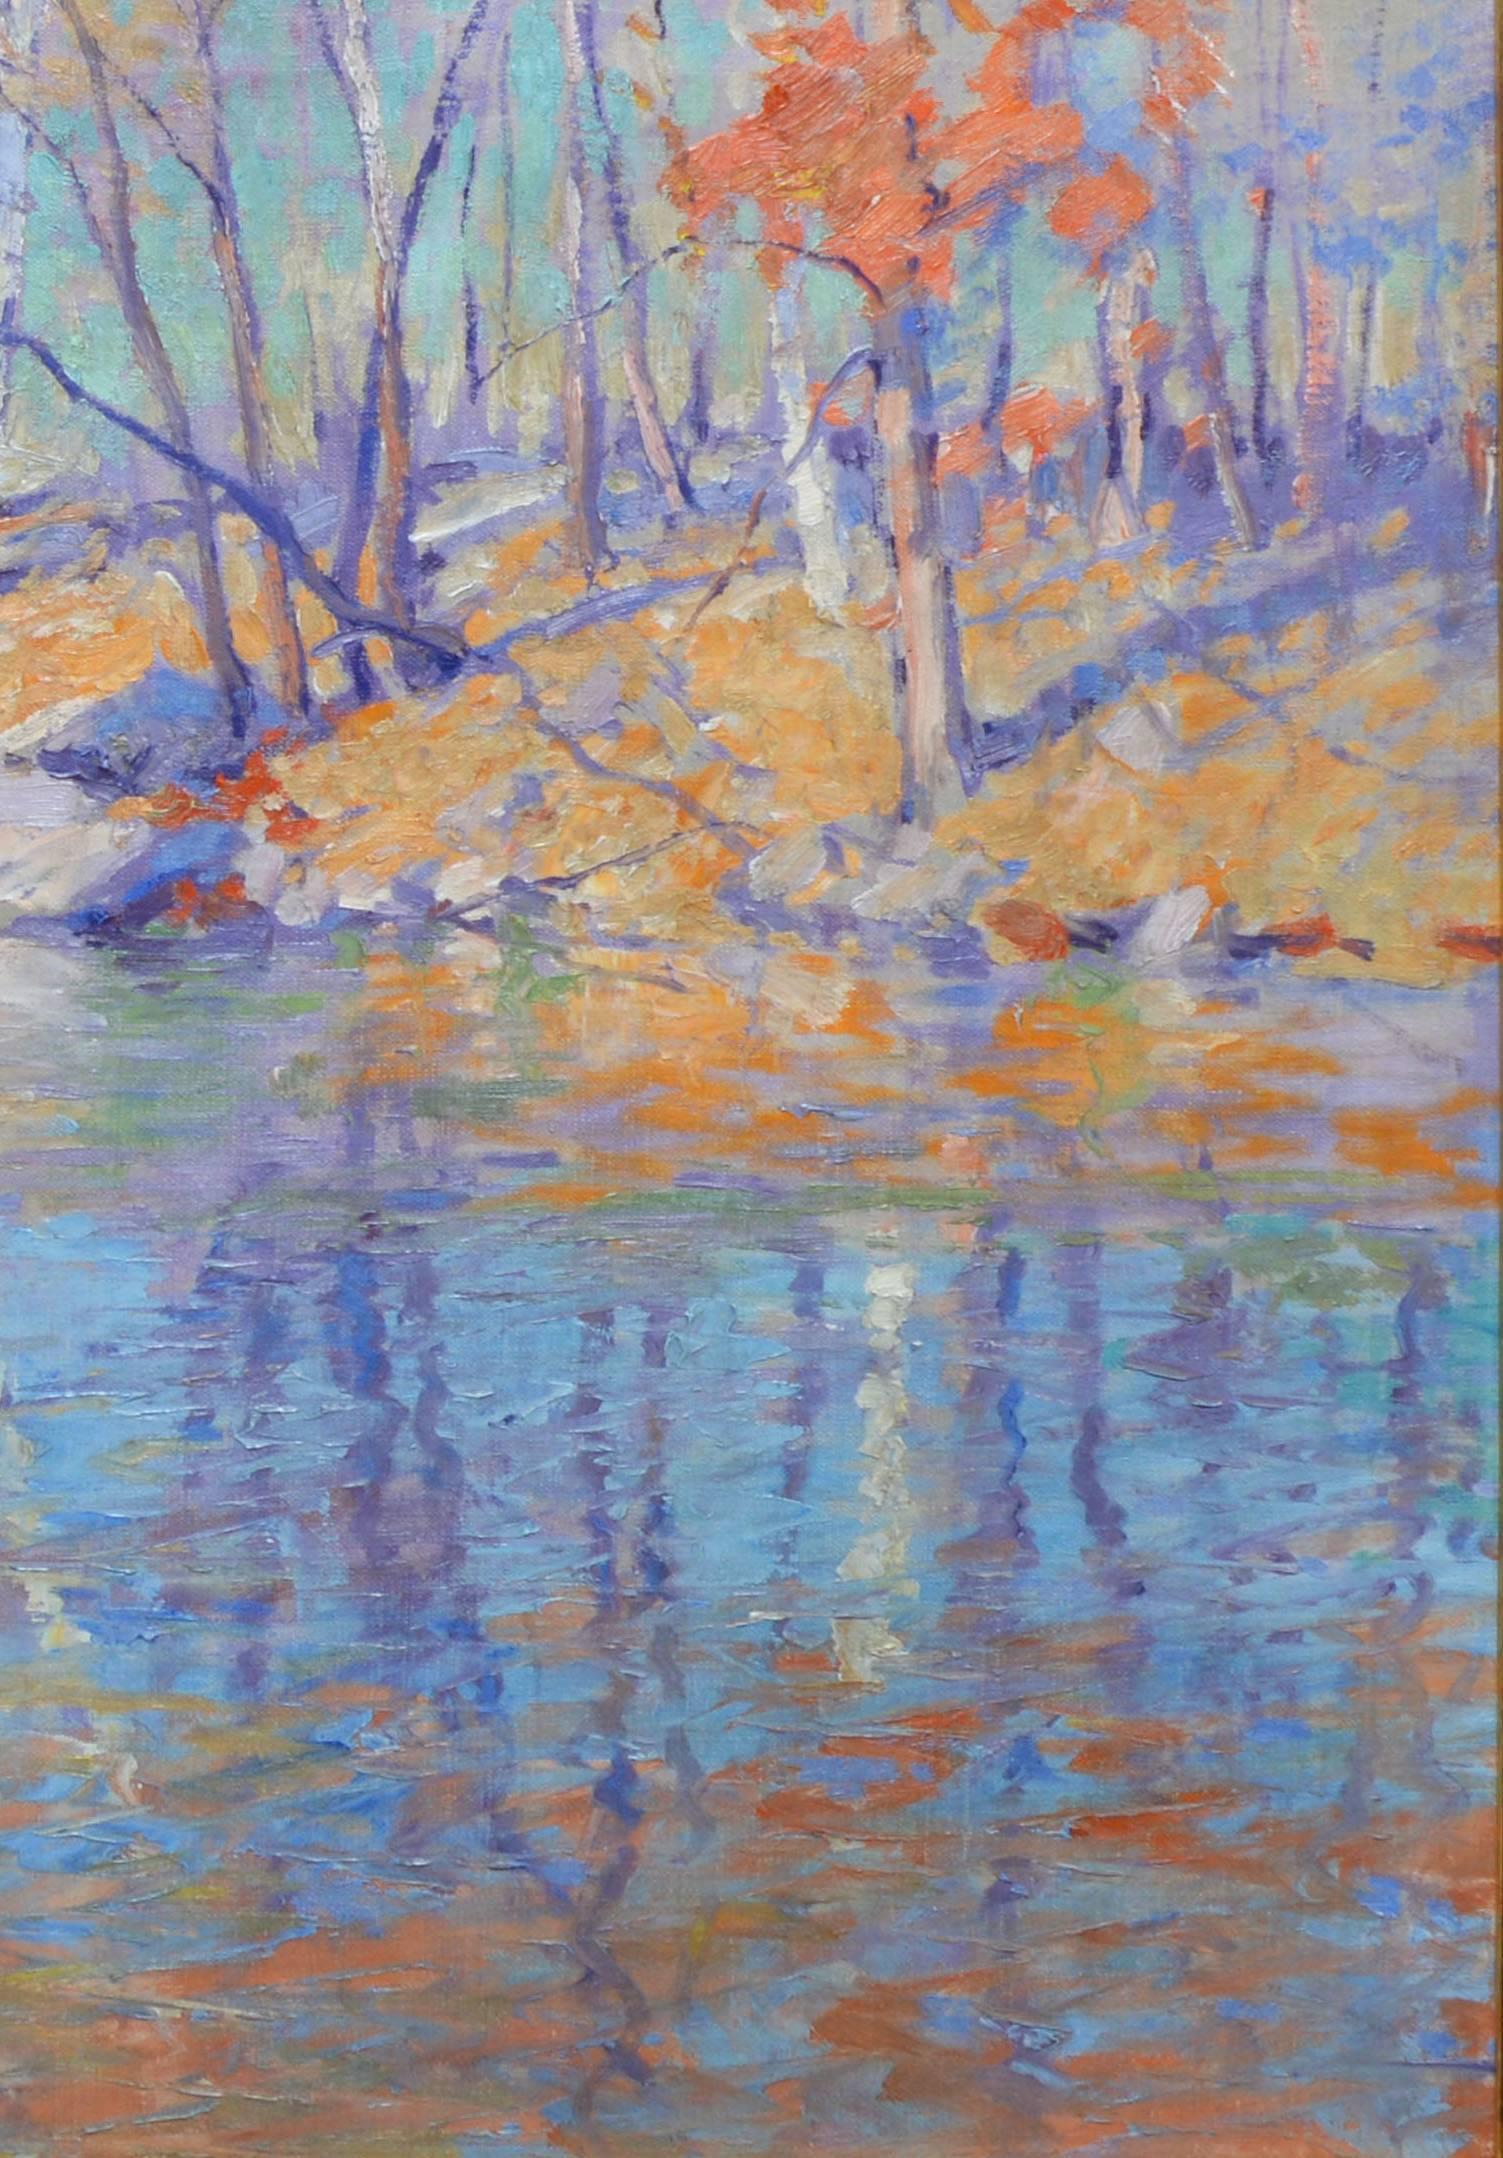 Fall River Landscape by Emile Gruppe - Impressionist Painting by Emile Albert Gruppe